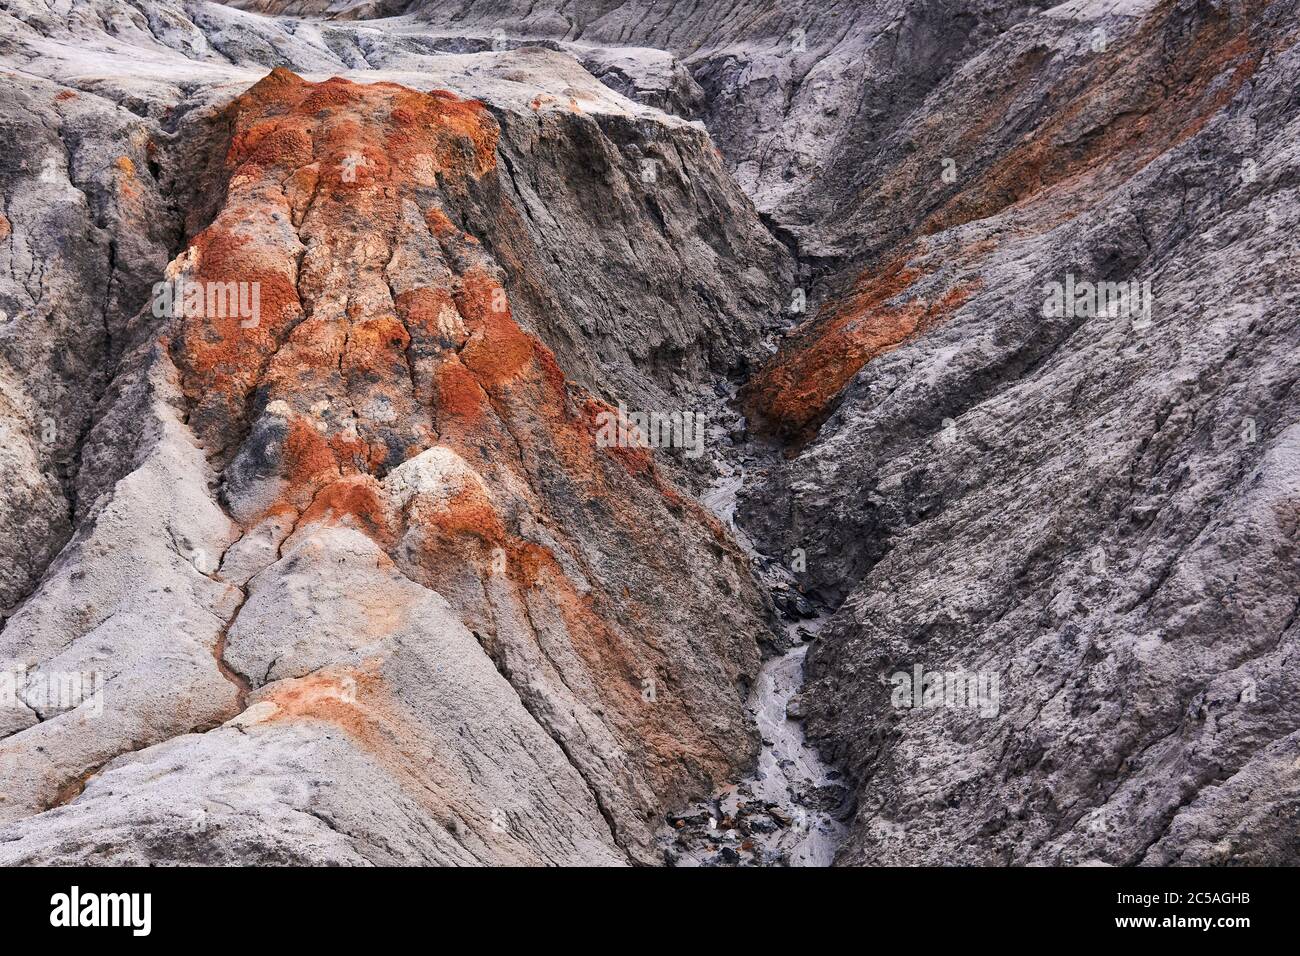 streams of water formed a gully in a clay slope devoid of soil Stock Photo